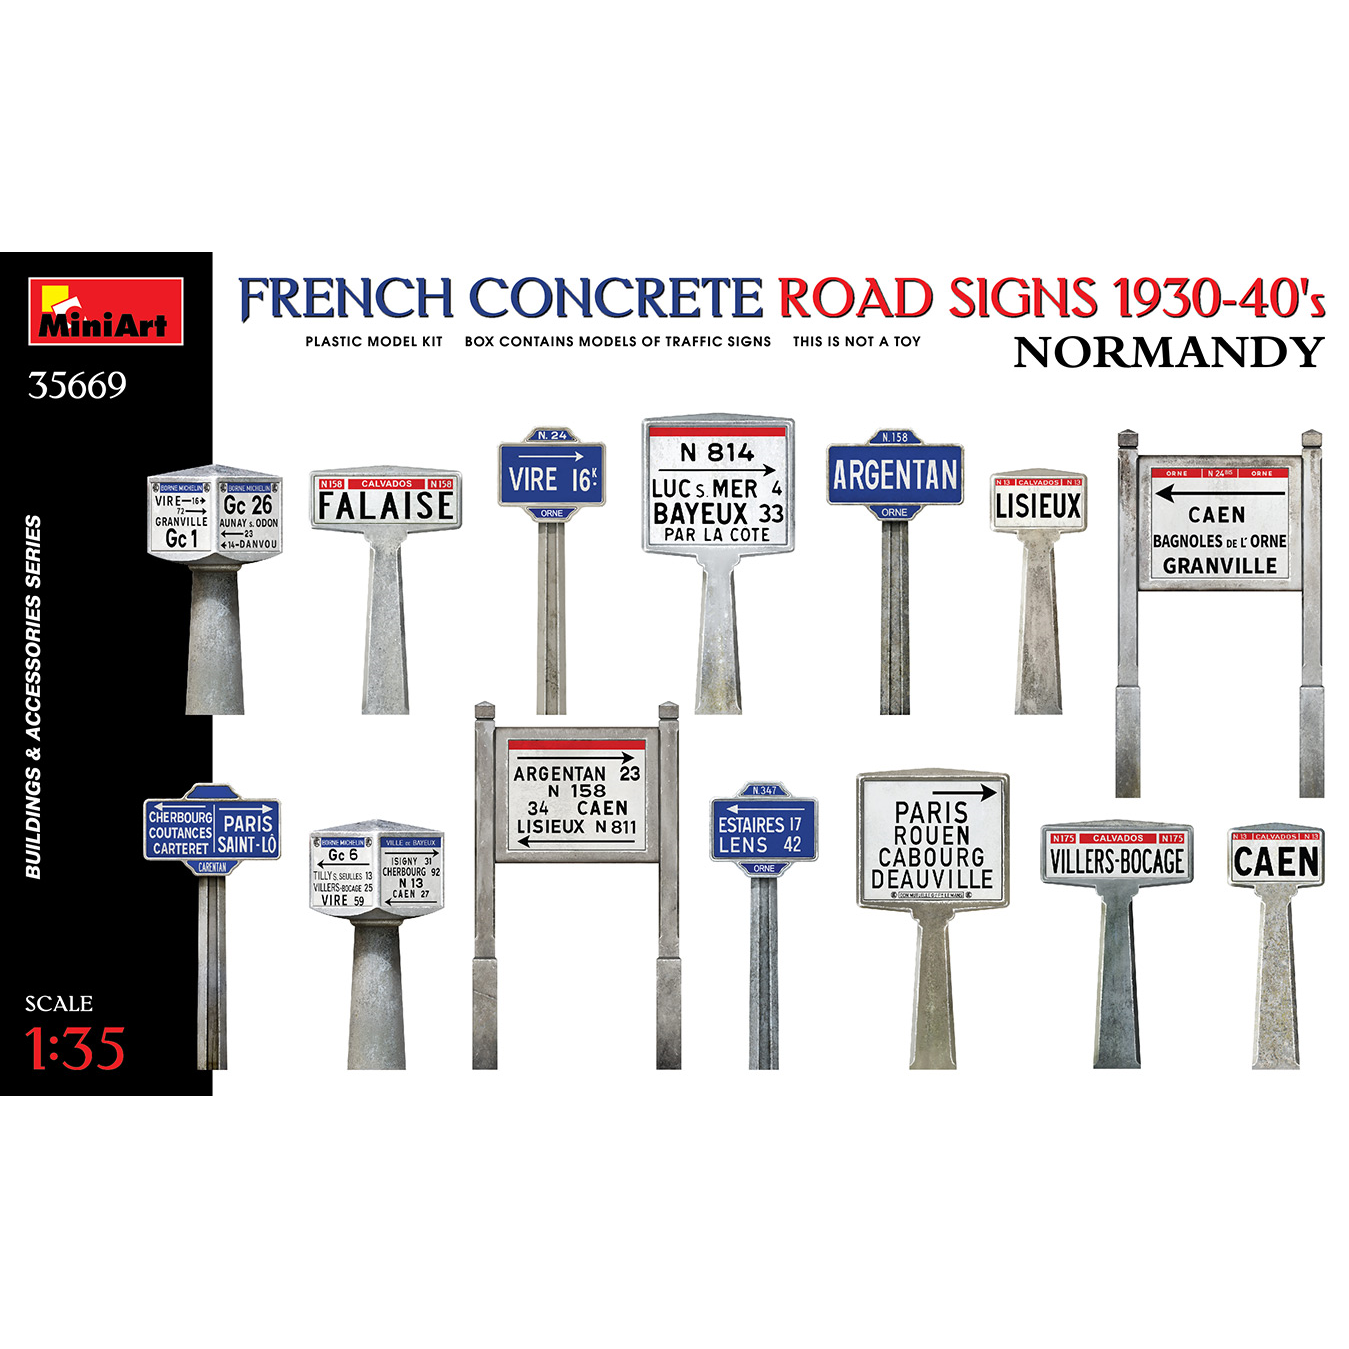 Miniart Models 35669 French Concrete Road Signs Normandy